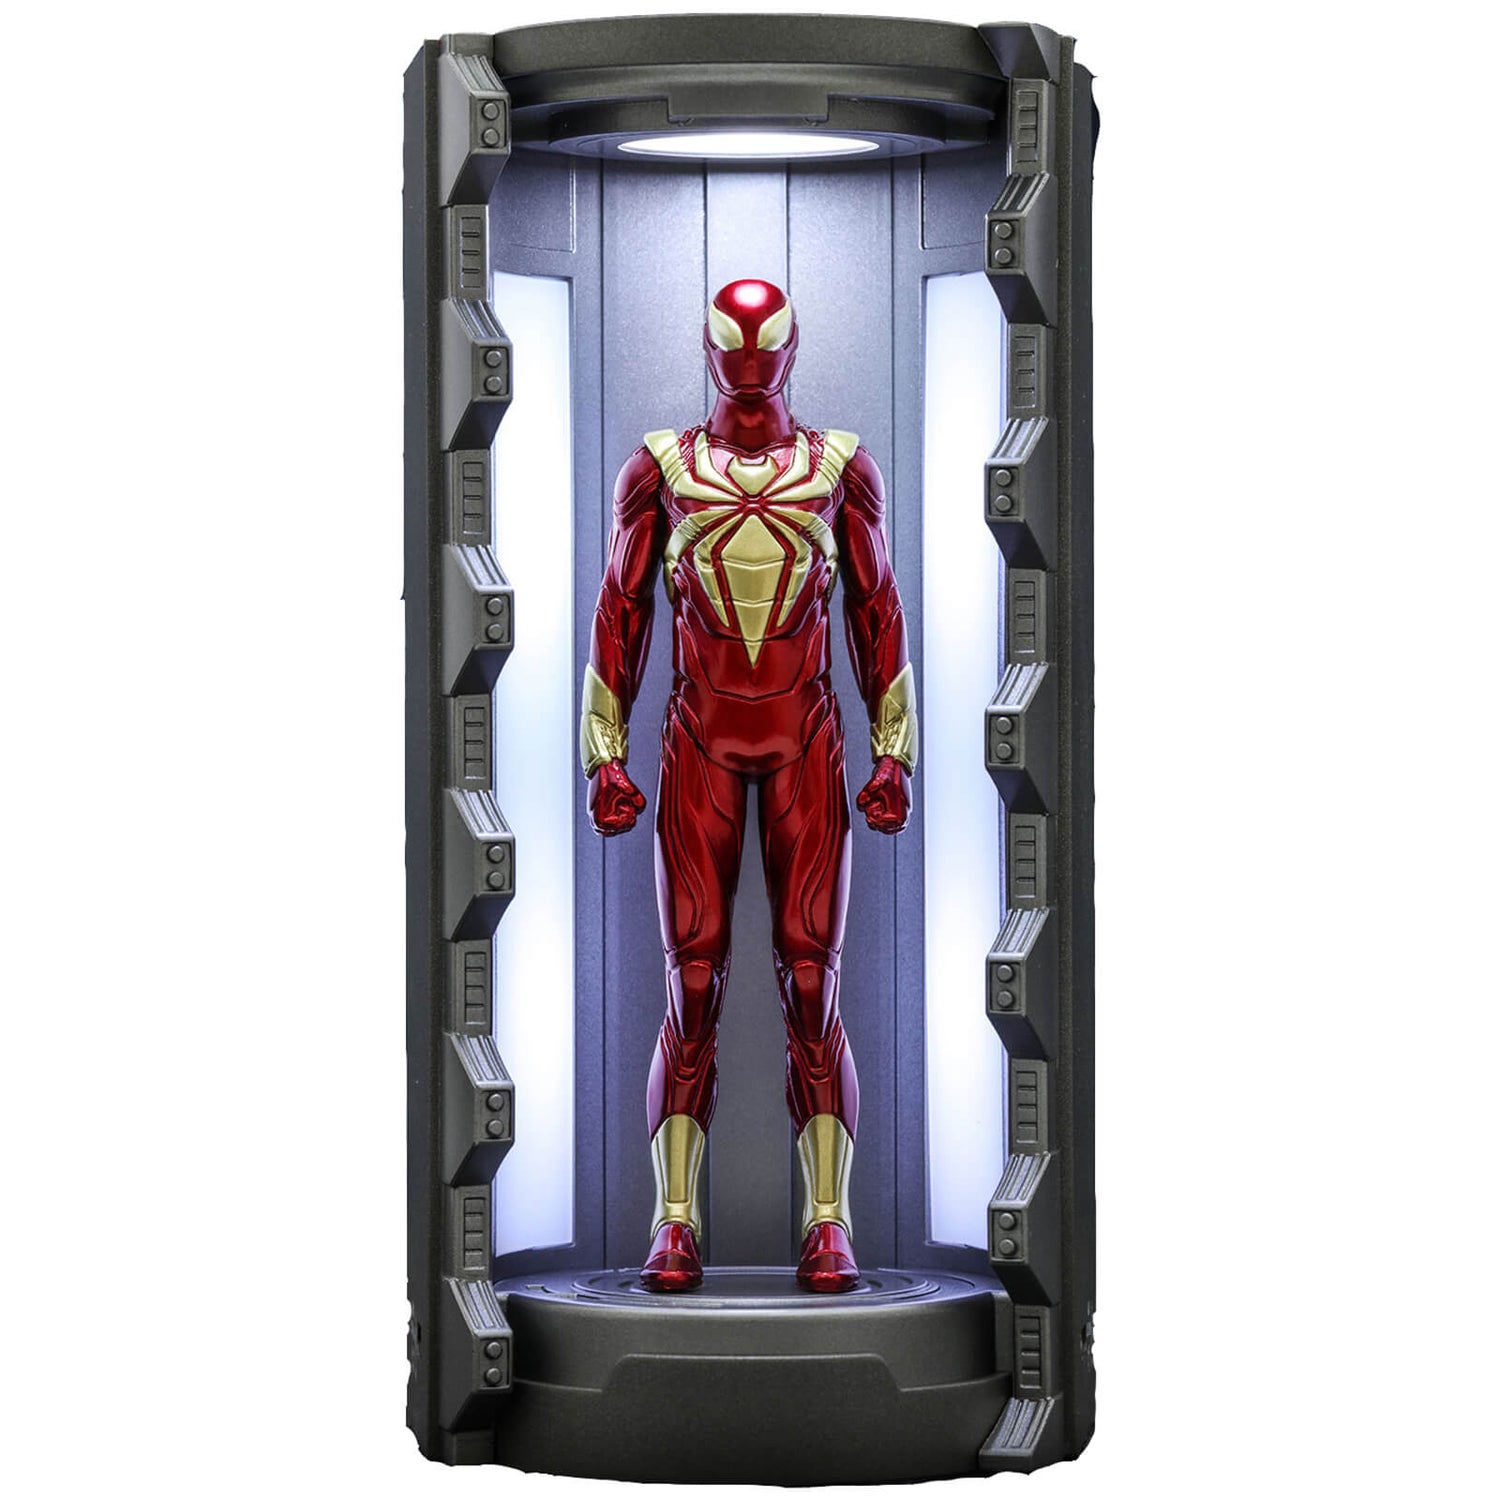 Hot Toys Marvel's Spider-Man Iron Spider Suit with Spider-Man Armory Video Game Masterpiece Compact Miniature Figure